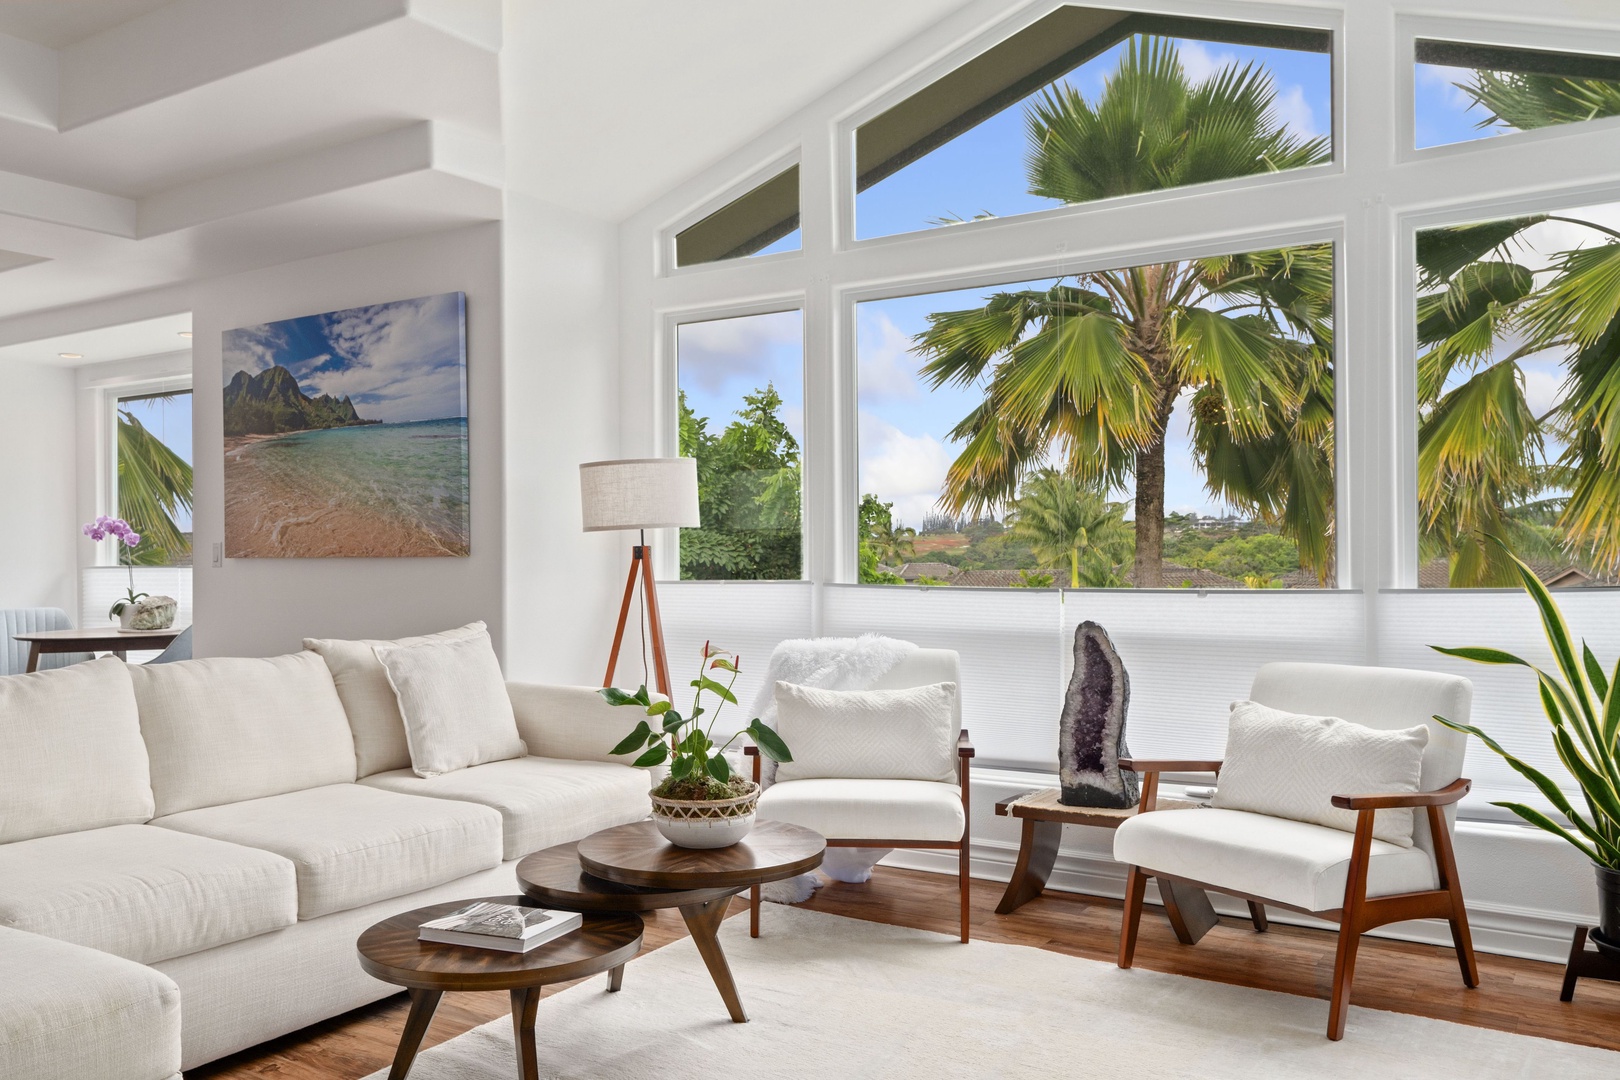 Princeville Vacation Rentals, Tropical Elegance - Relax in a serene living area with floor-to-ceiling windows offering a panoramic view of lush palms, complemented by chic decor and inviting white couches for your stay.